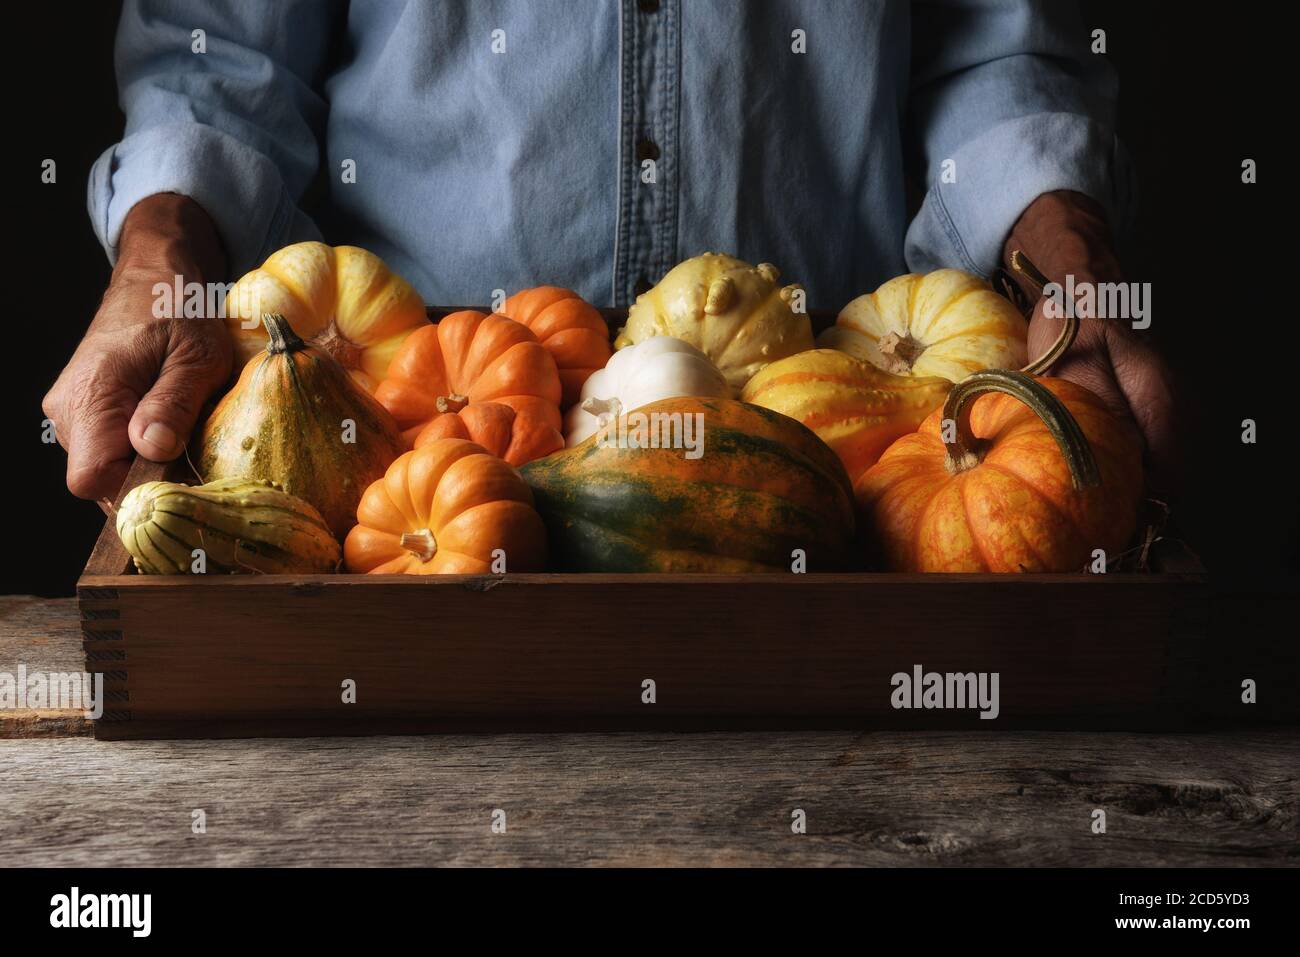 Farmer at his stand holding a wood crate of Autumn vegetables and decorative gourds and pumpkins, with warm side light. Stock Photo